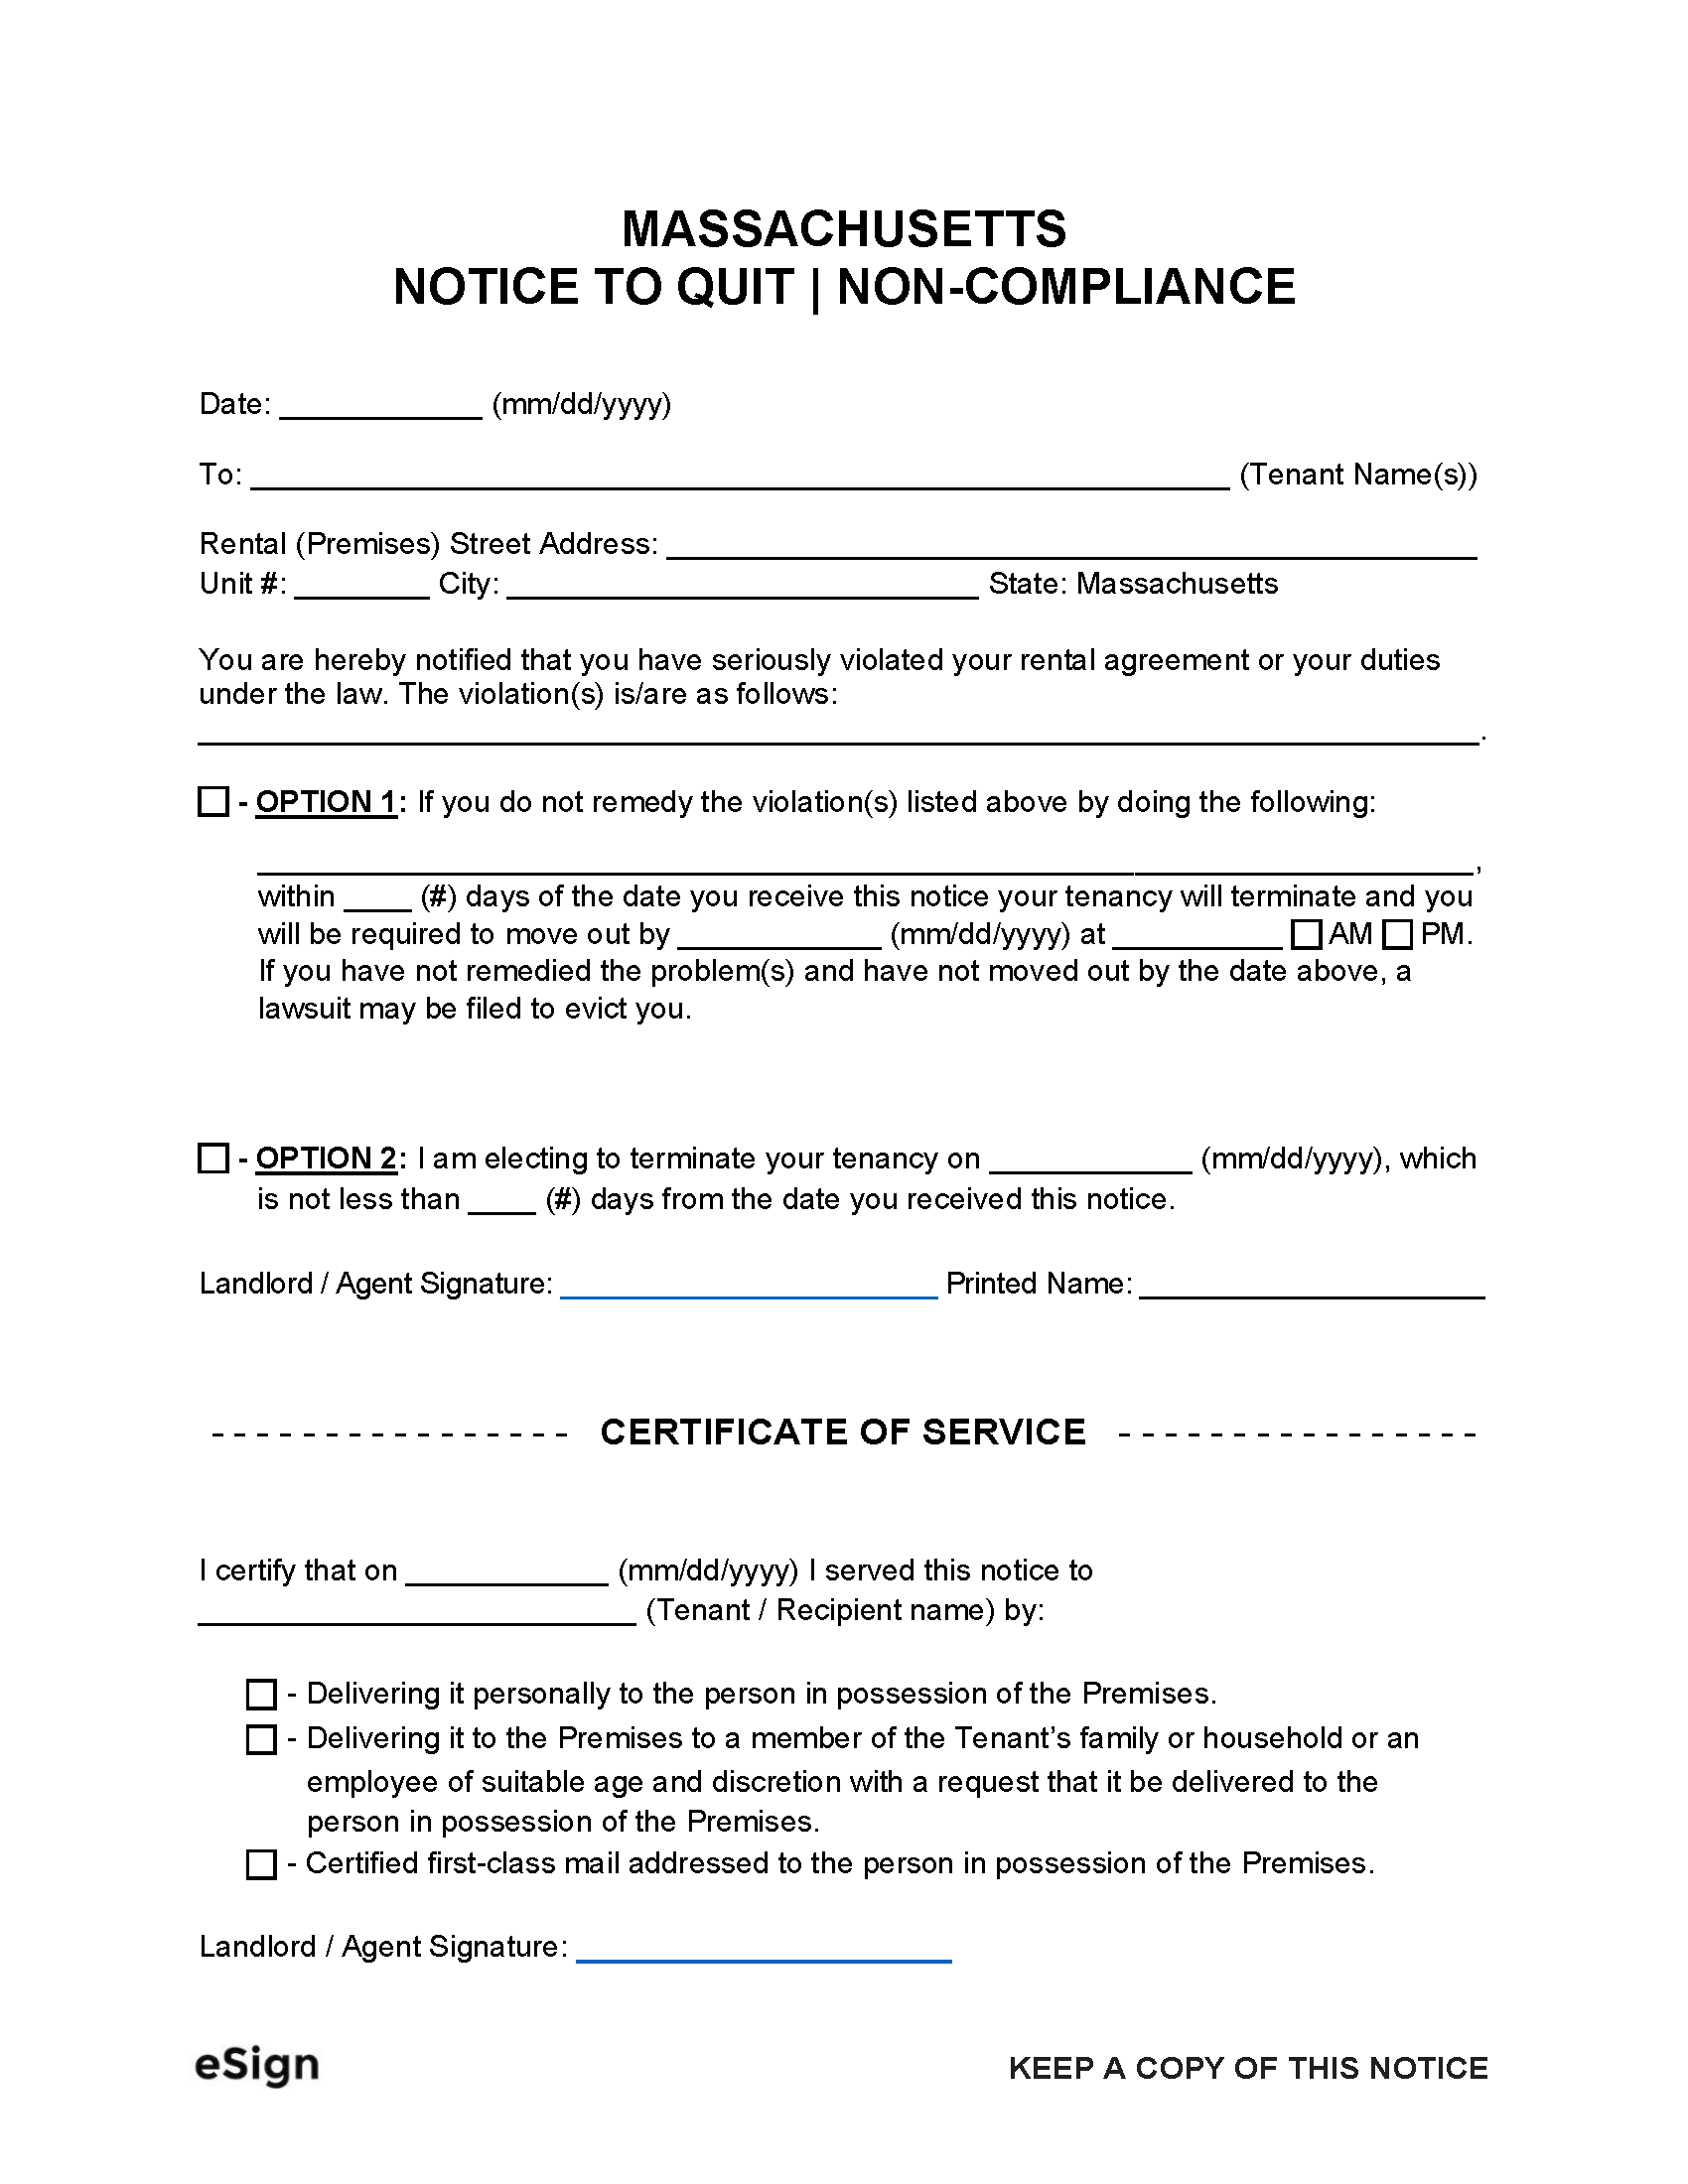 free-massachusetts-notice-to-quit-non-compliance-pdf-word